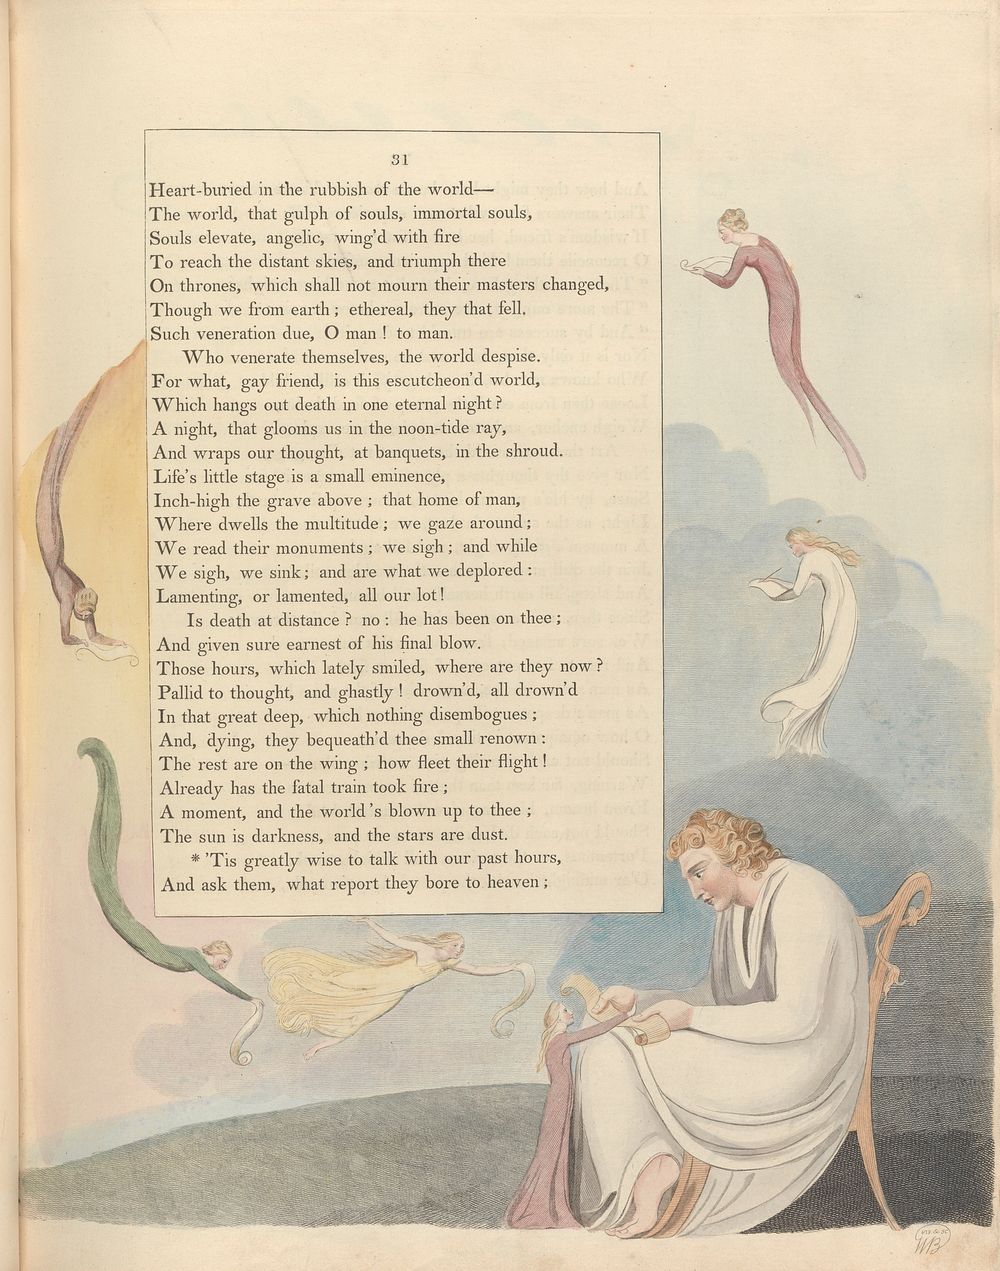 Young's Night Thoughts, Page 31, "'Tis greatly wise to talk with our past hours" by William Blake.